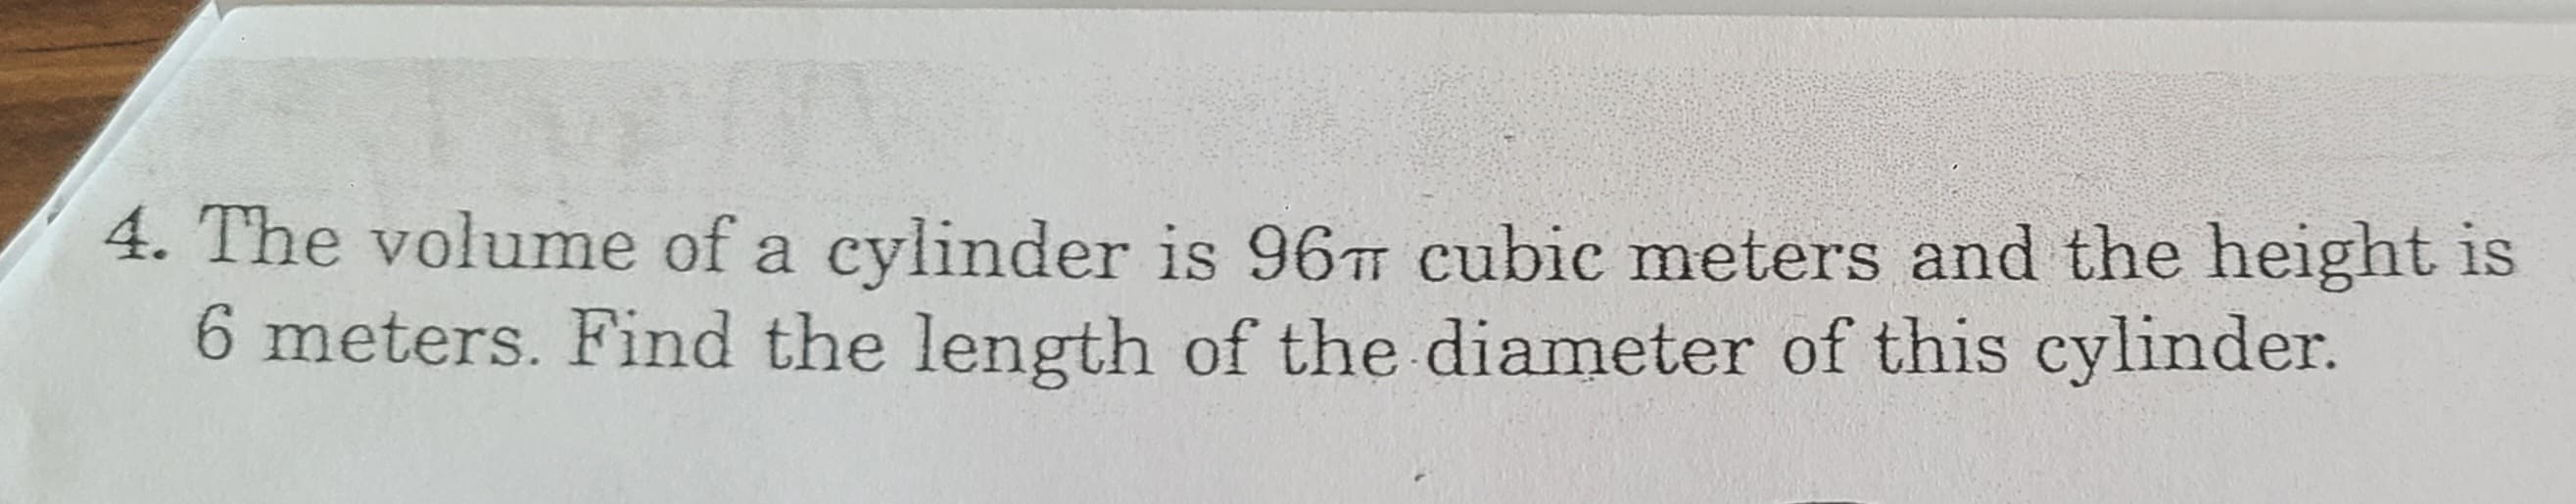 4. The volume of a cylinder is 96 cubic meters and the height is
6 meters. Find the length of the diameter of this cylinder.